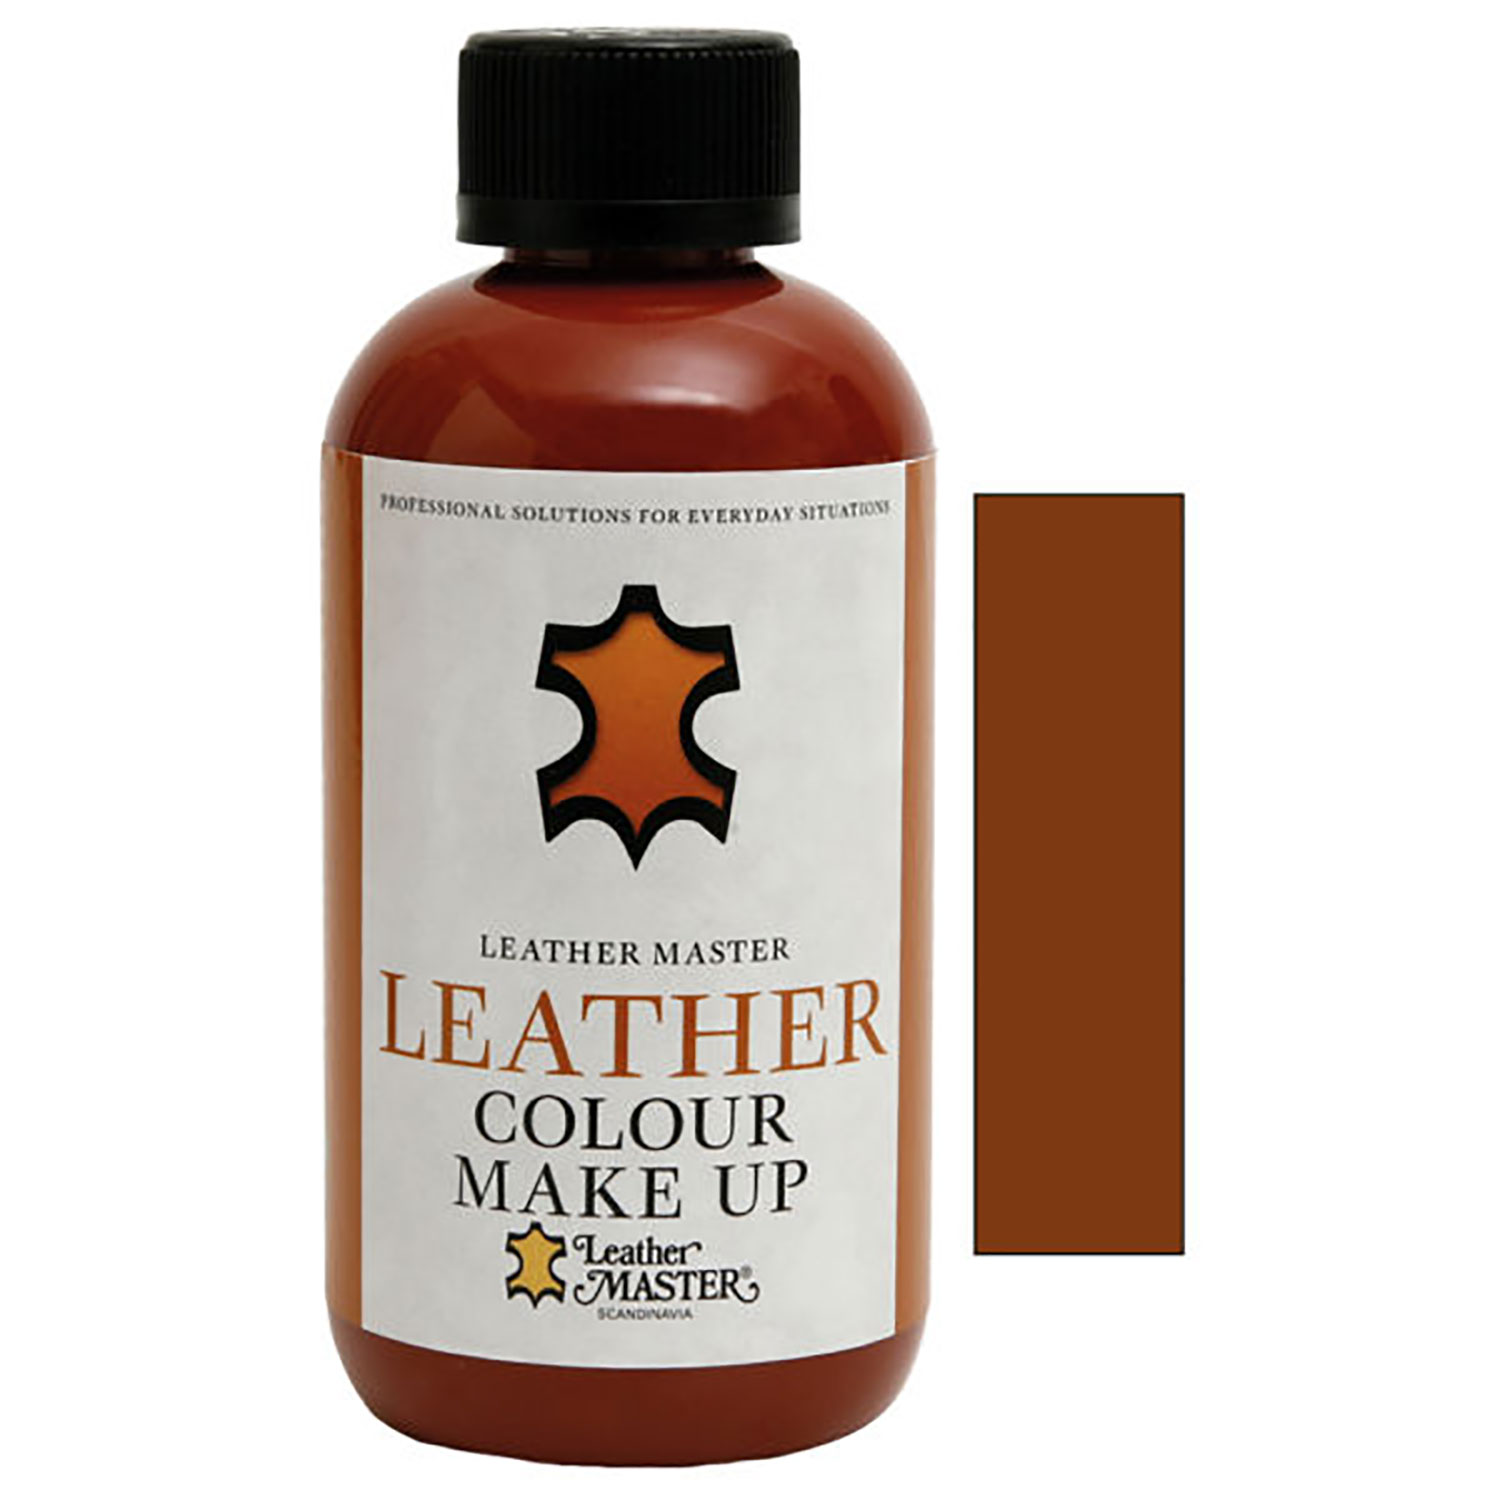 Leather Master, Colour make up - light brown 250 ml